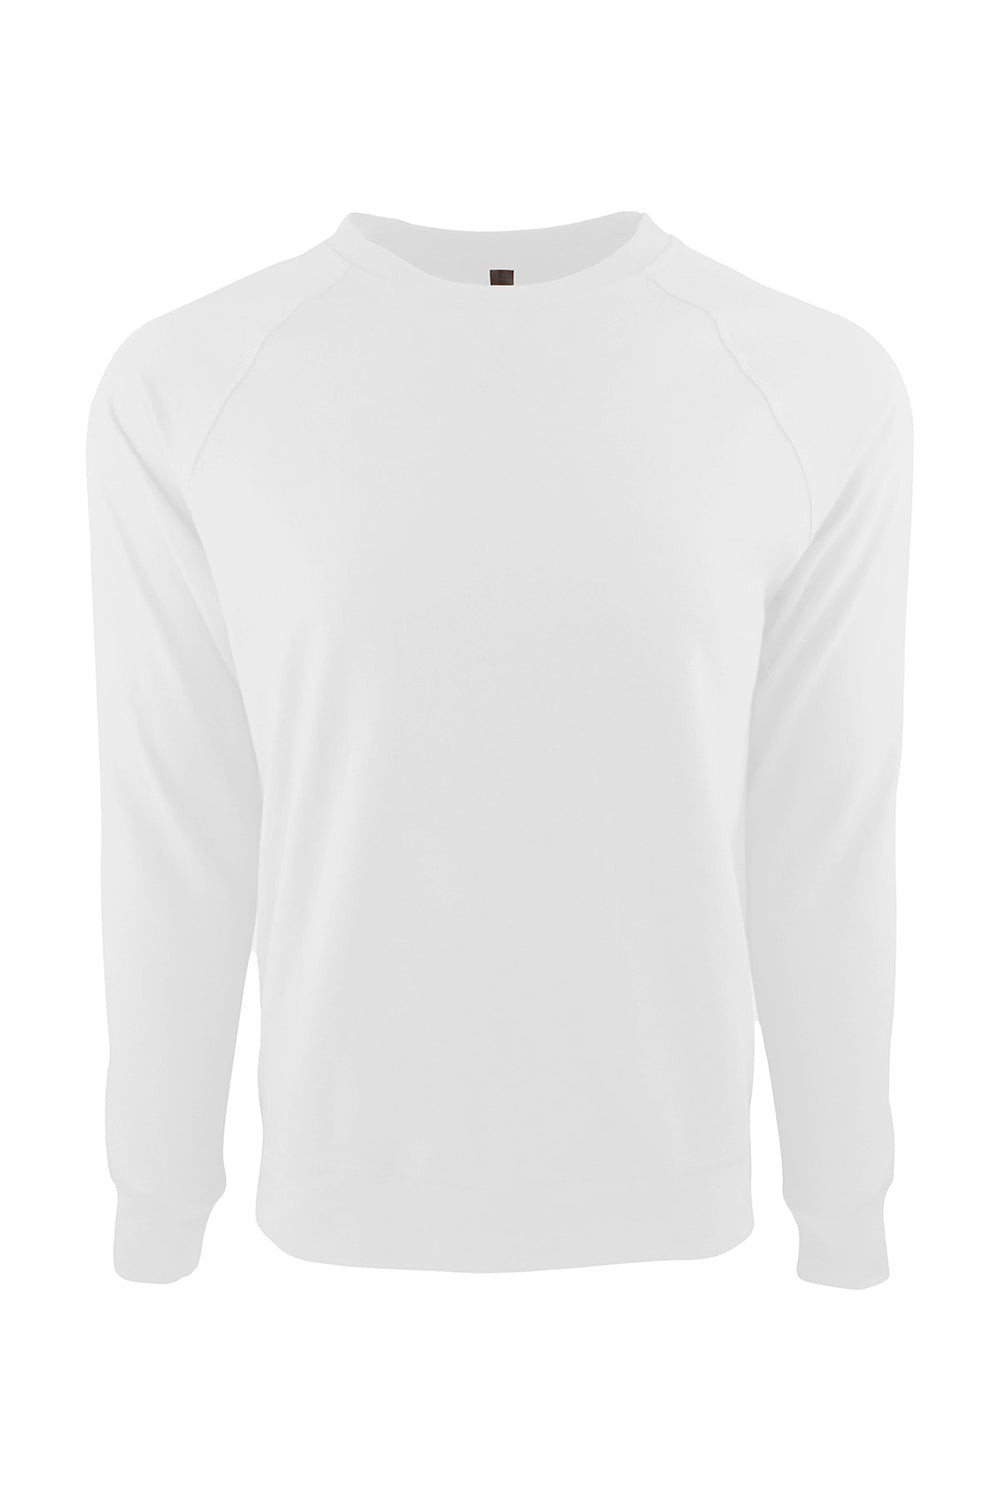 Next Level N9000/9000 Mens French Terry Long Sleeve Crewneck T-Shirt White Flat Front